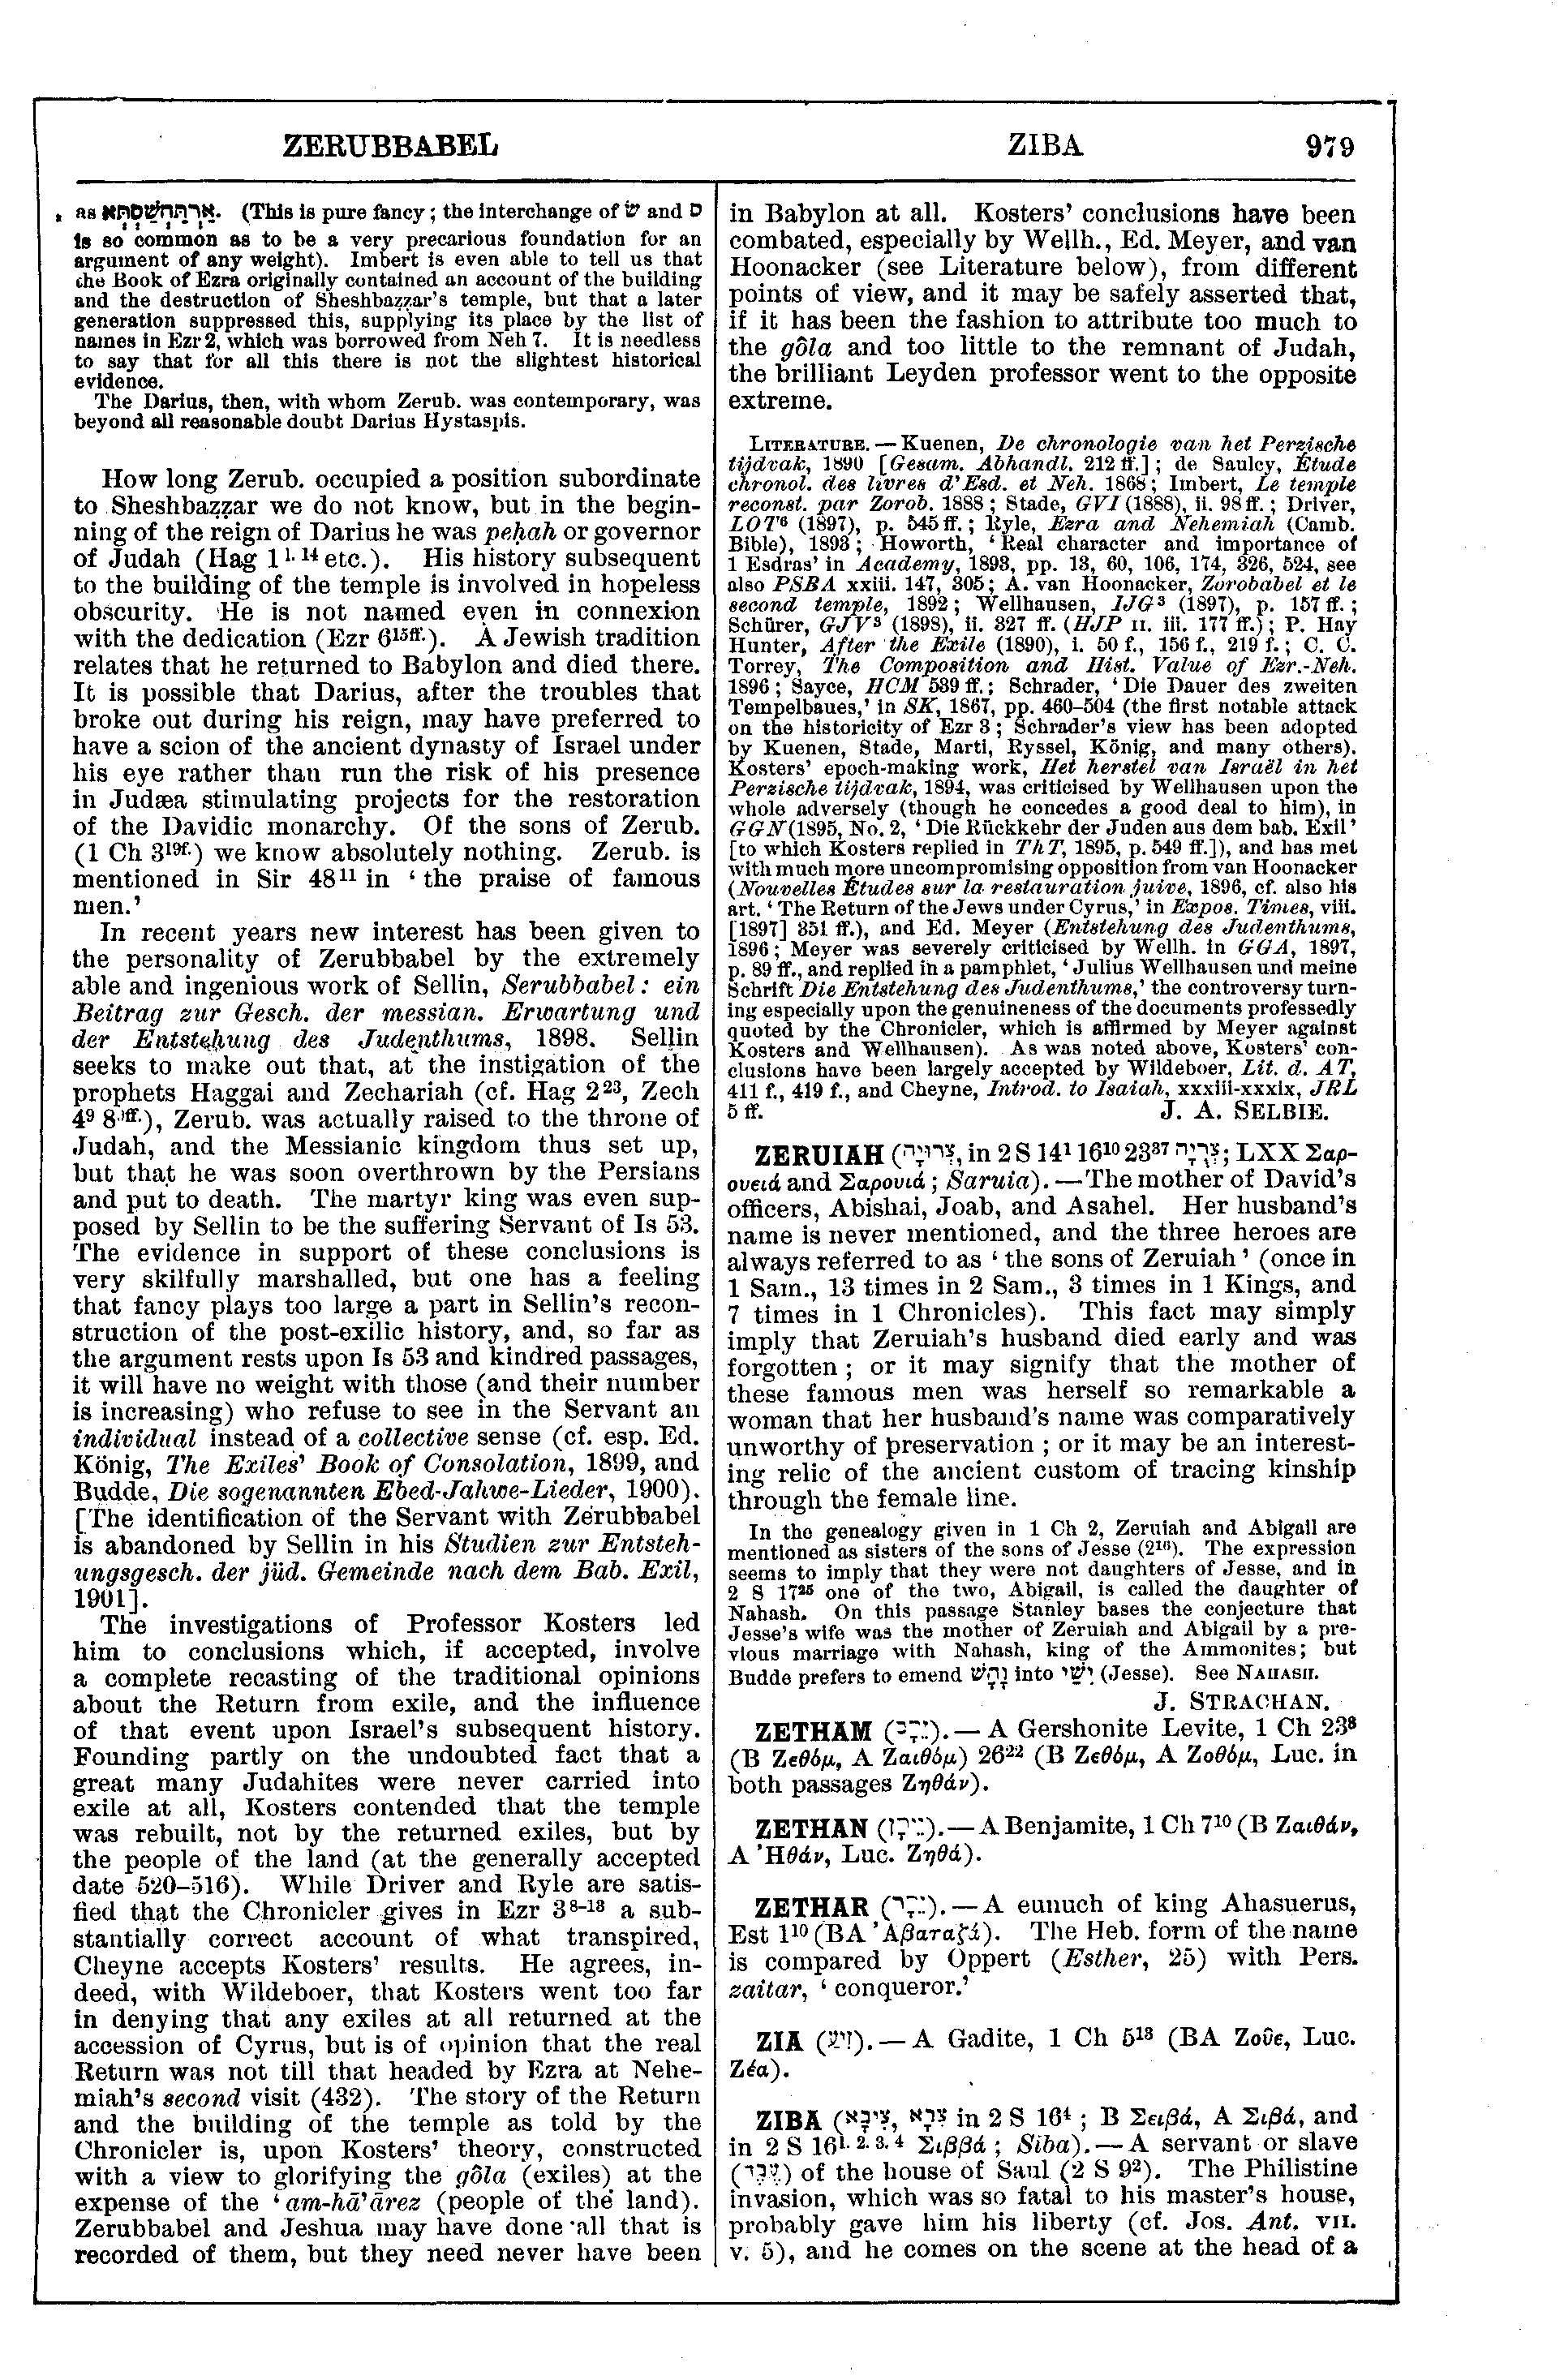 Image of page 979